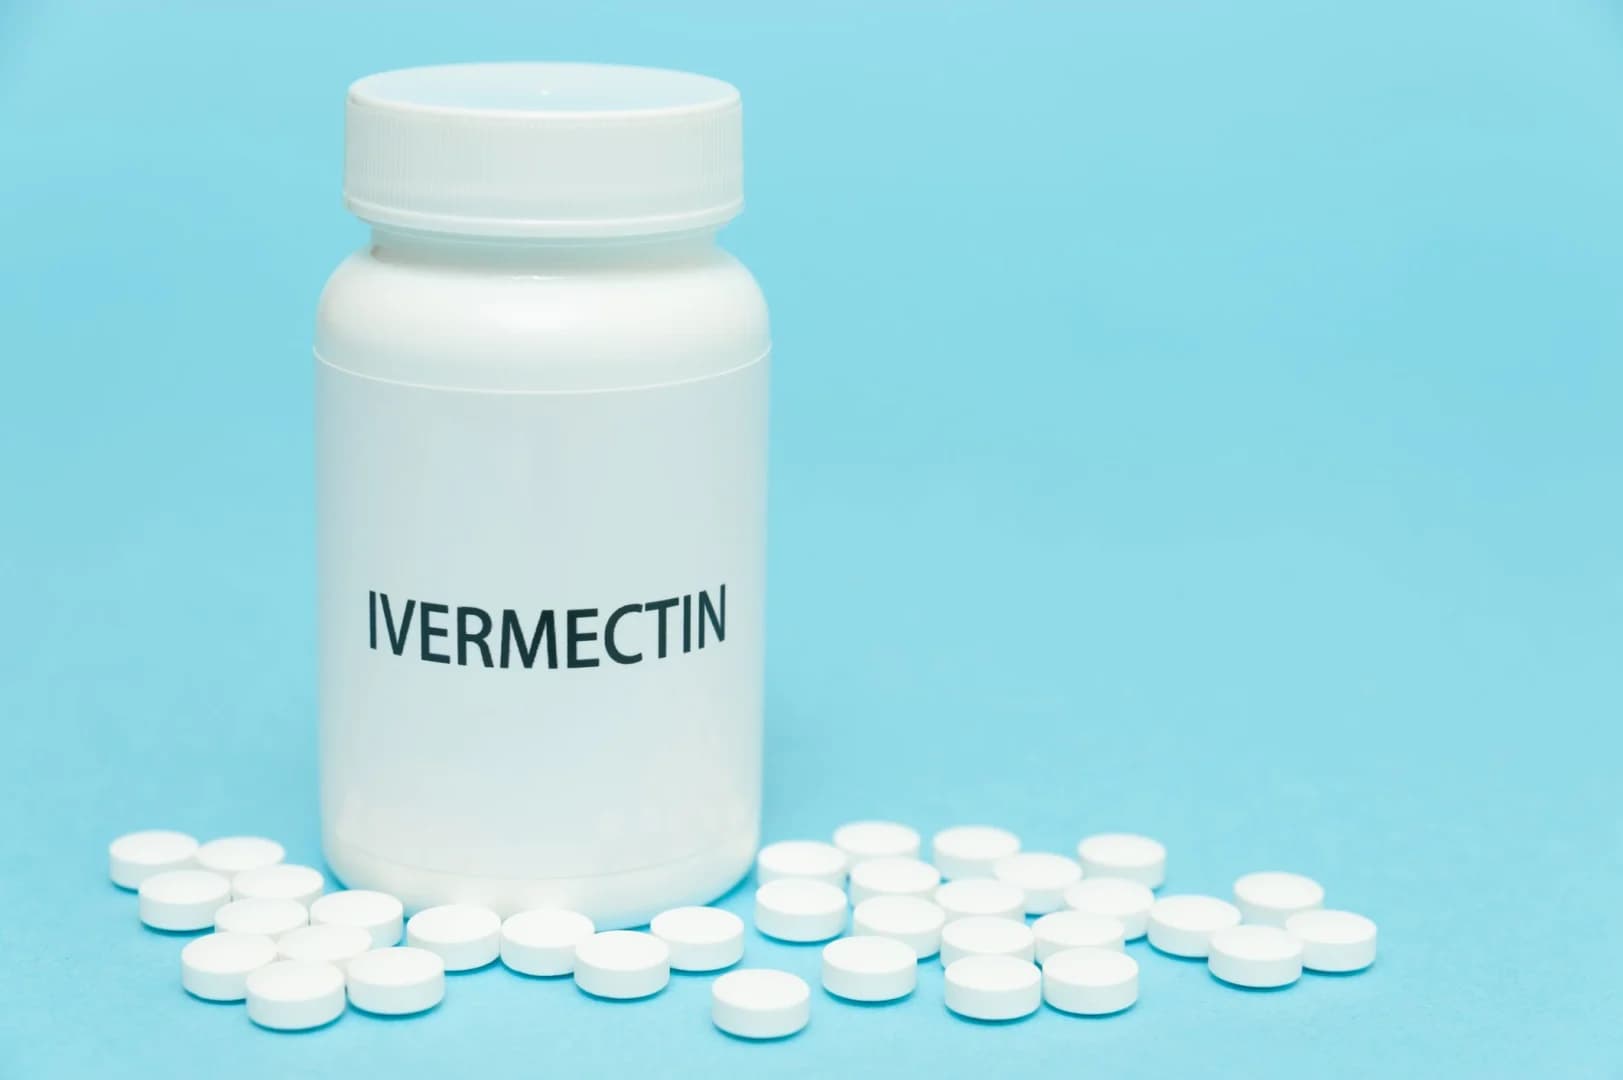 Watch: The Ivermectin Story